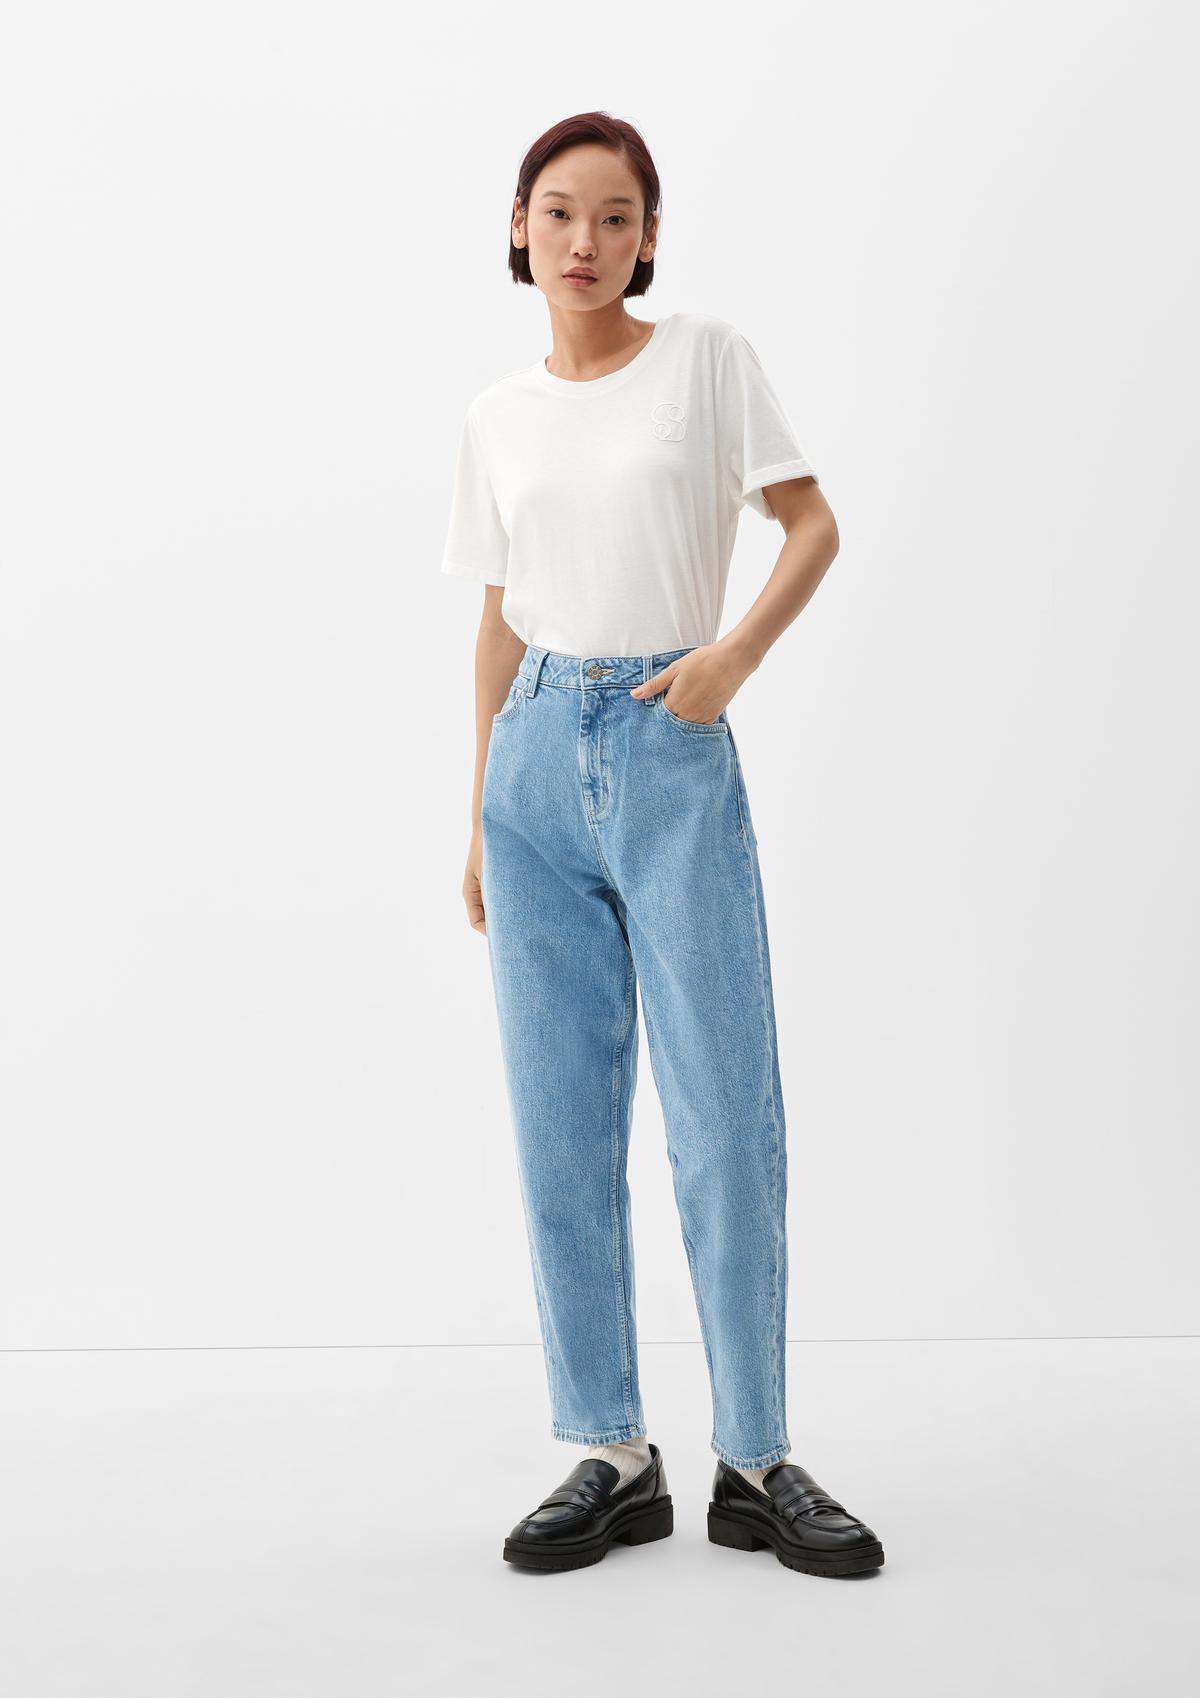 Relaxed: jeans in a Mom fit